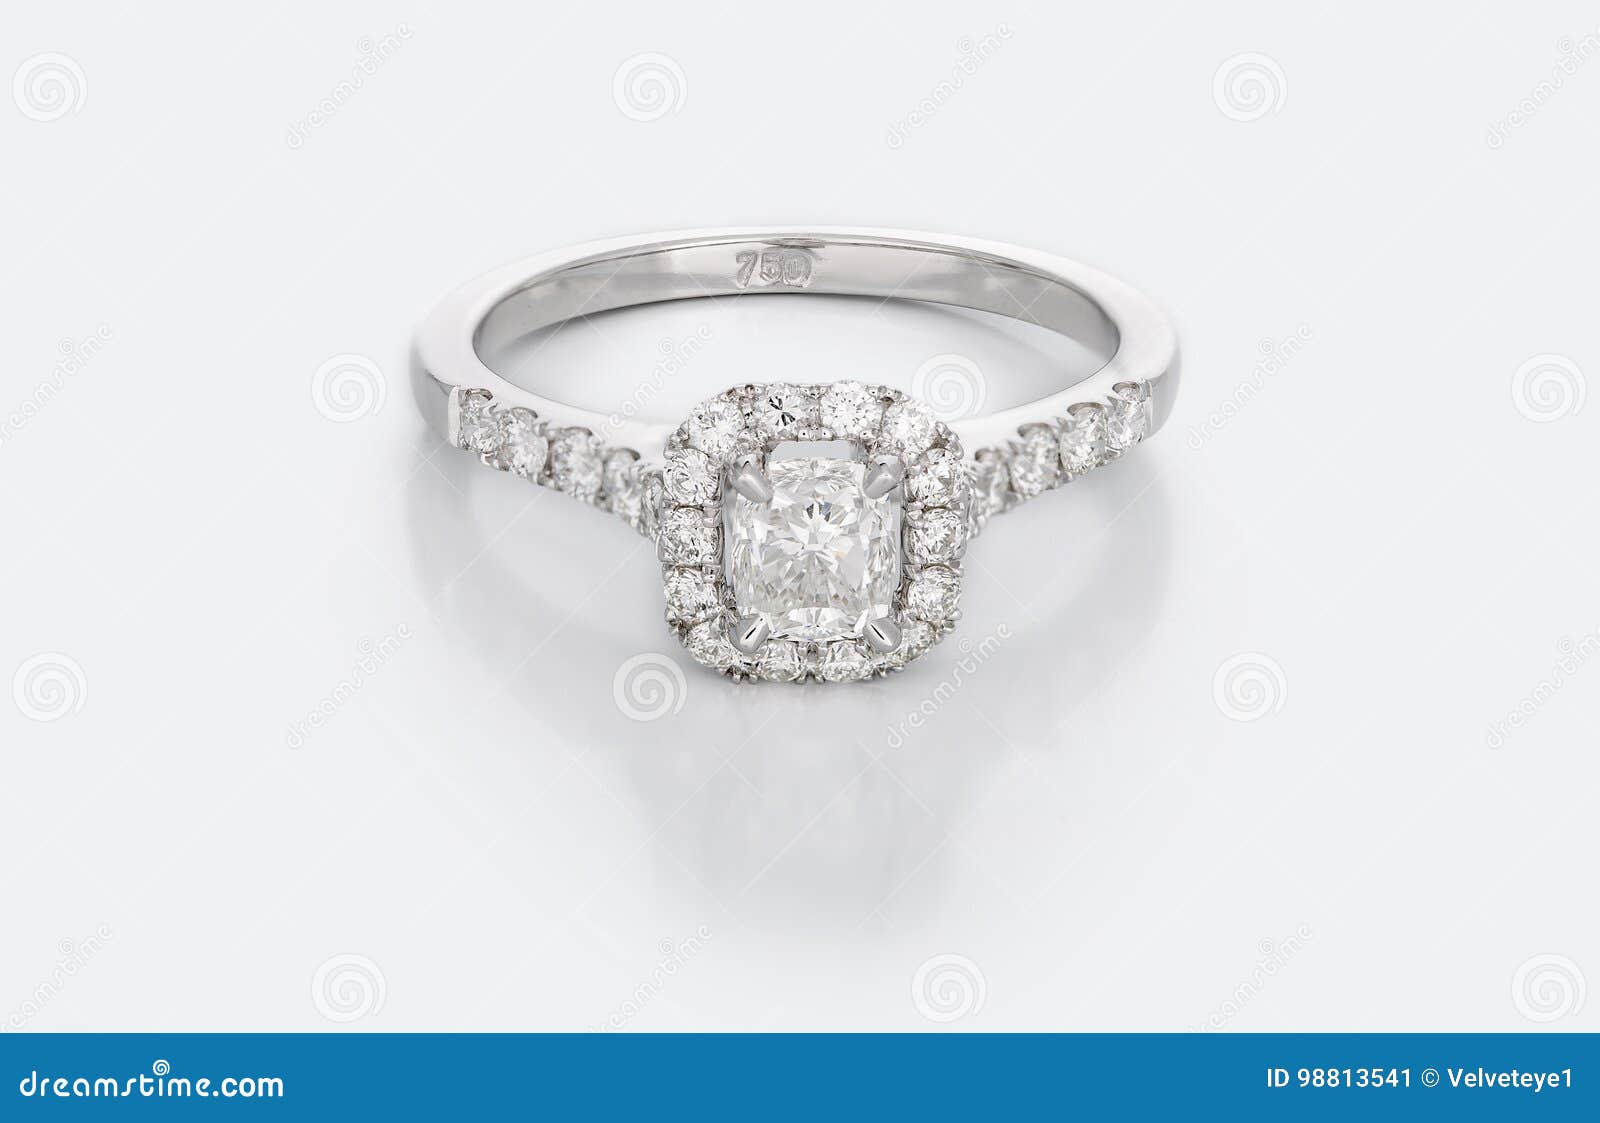 large diamond solitaire engagement or wedding ring